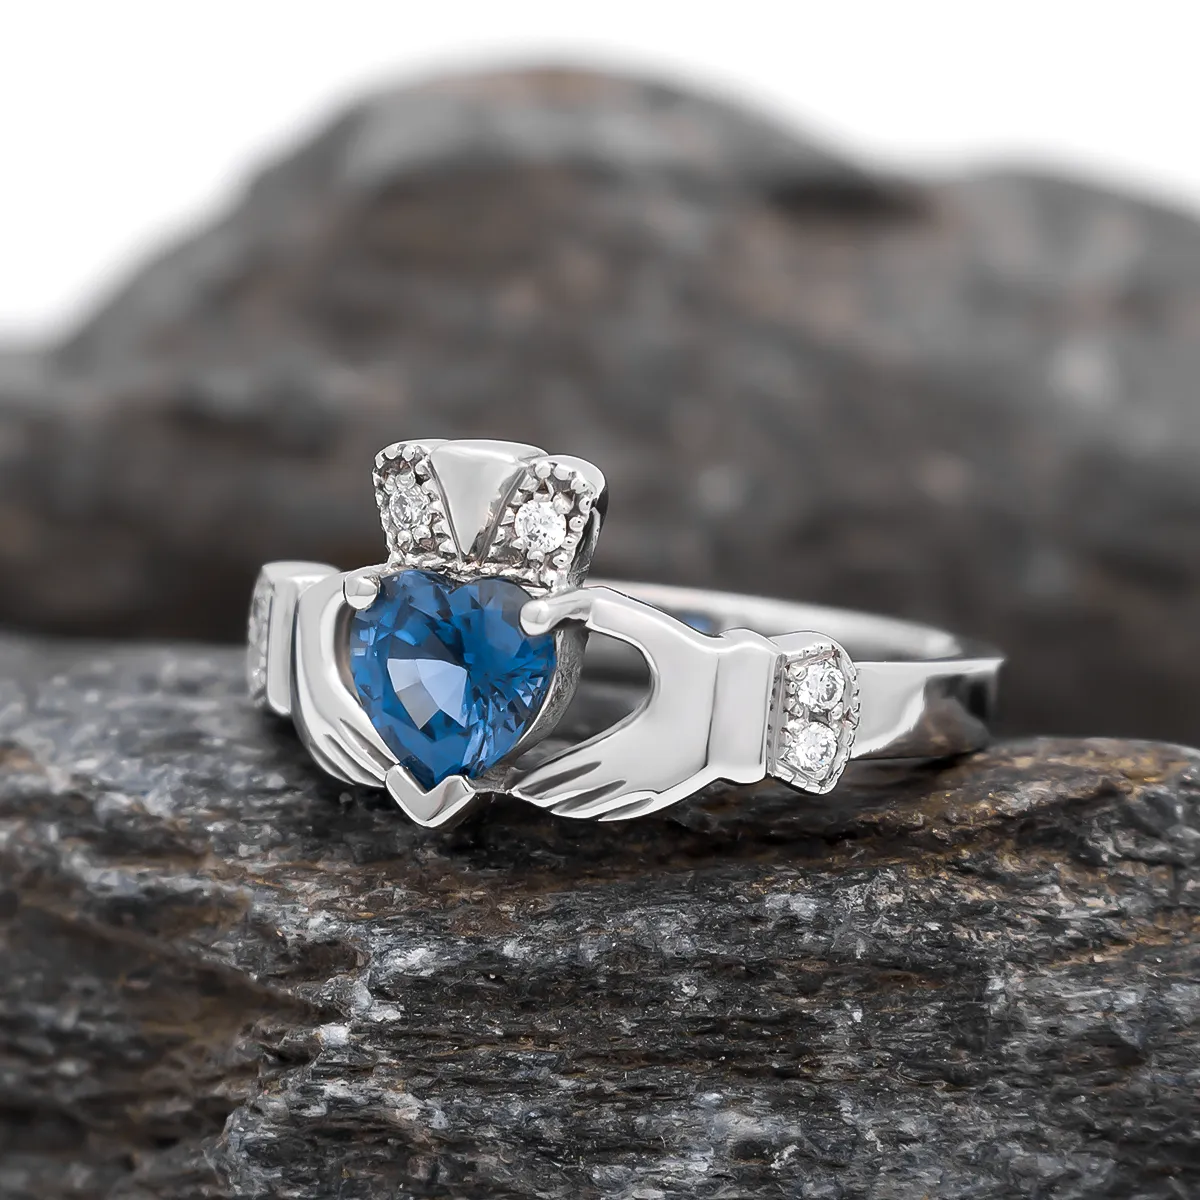 IJCR0035 White Gold Claddagh Ring With Sapphire 7